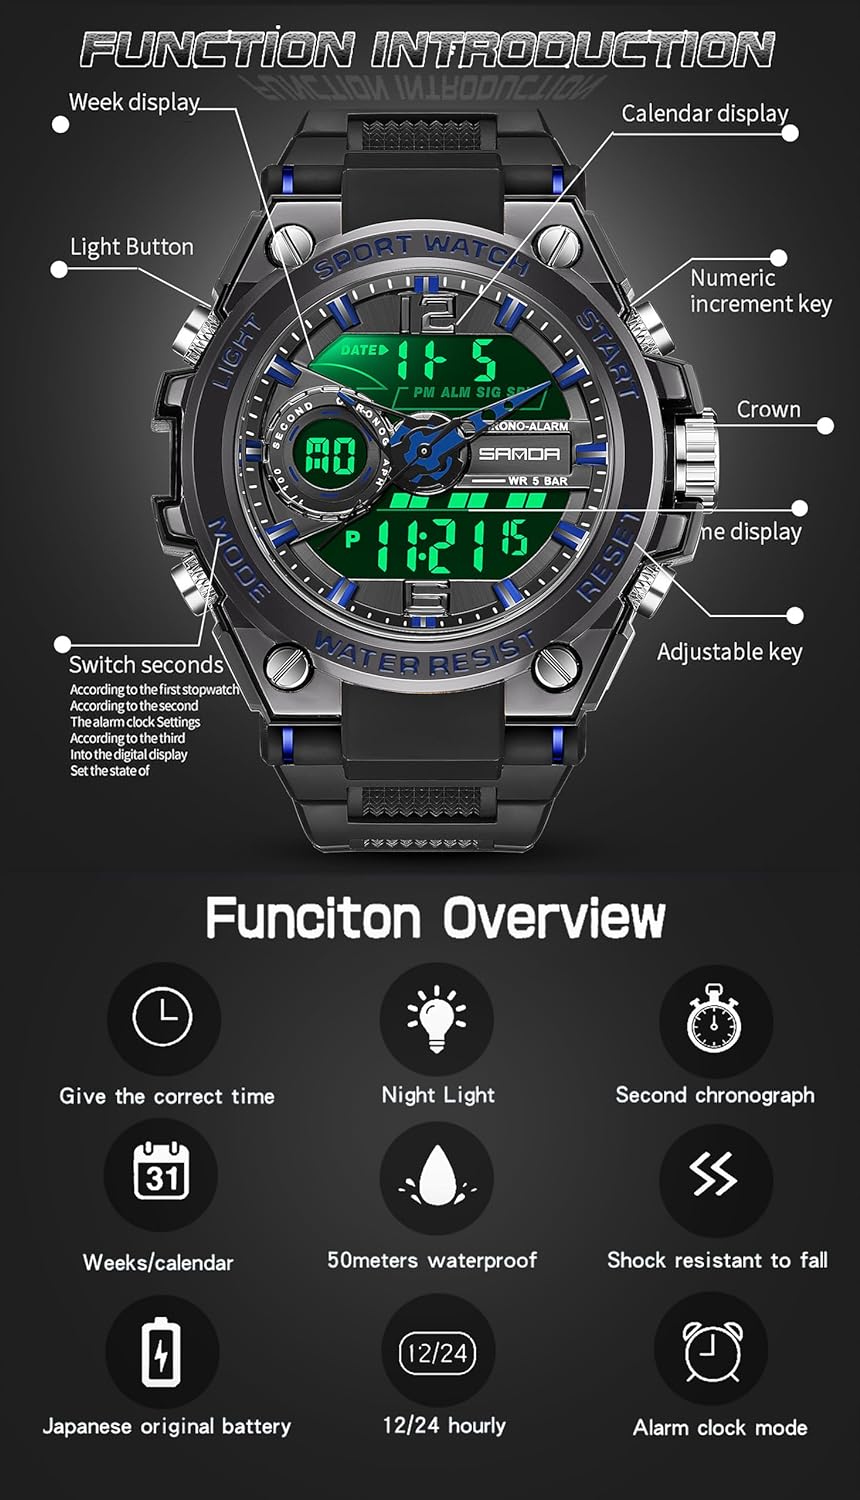 FORSINING Men's Military Watches Sports Waterproof Watch Analog Digital Sport Watch Electronic Tactical Army Watches for Men Date Multi Function LED Alarm Stopwatch, Blue, sport